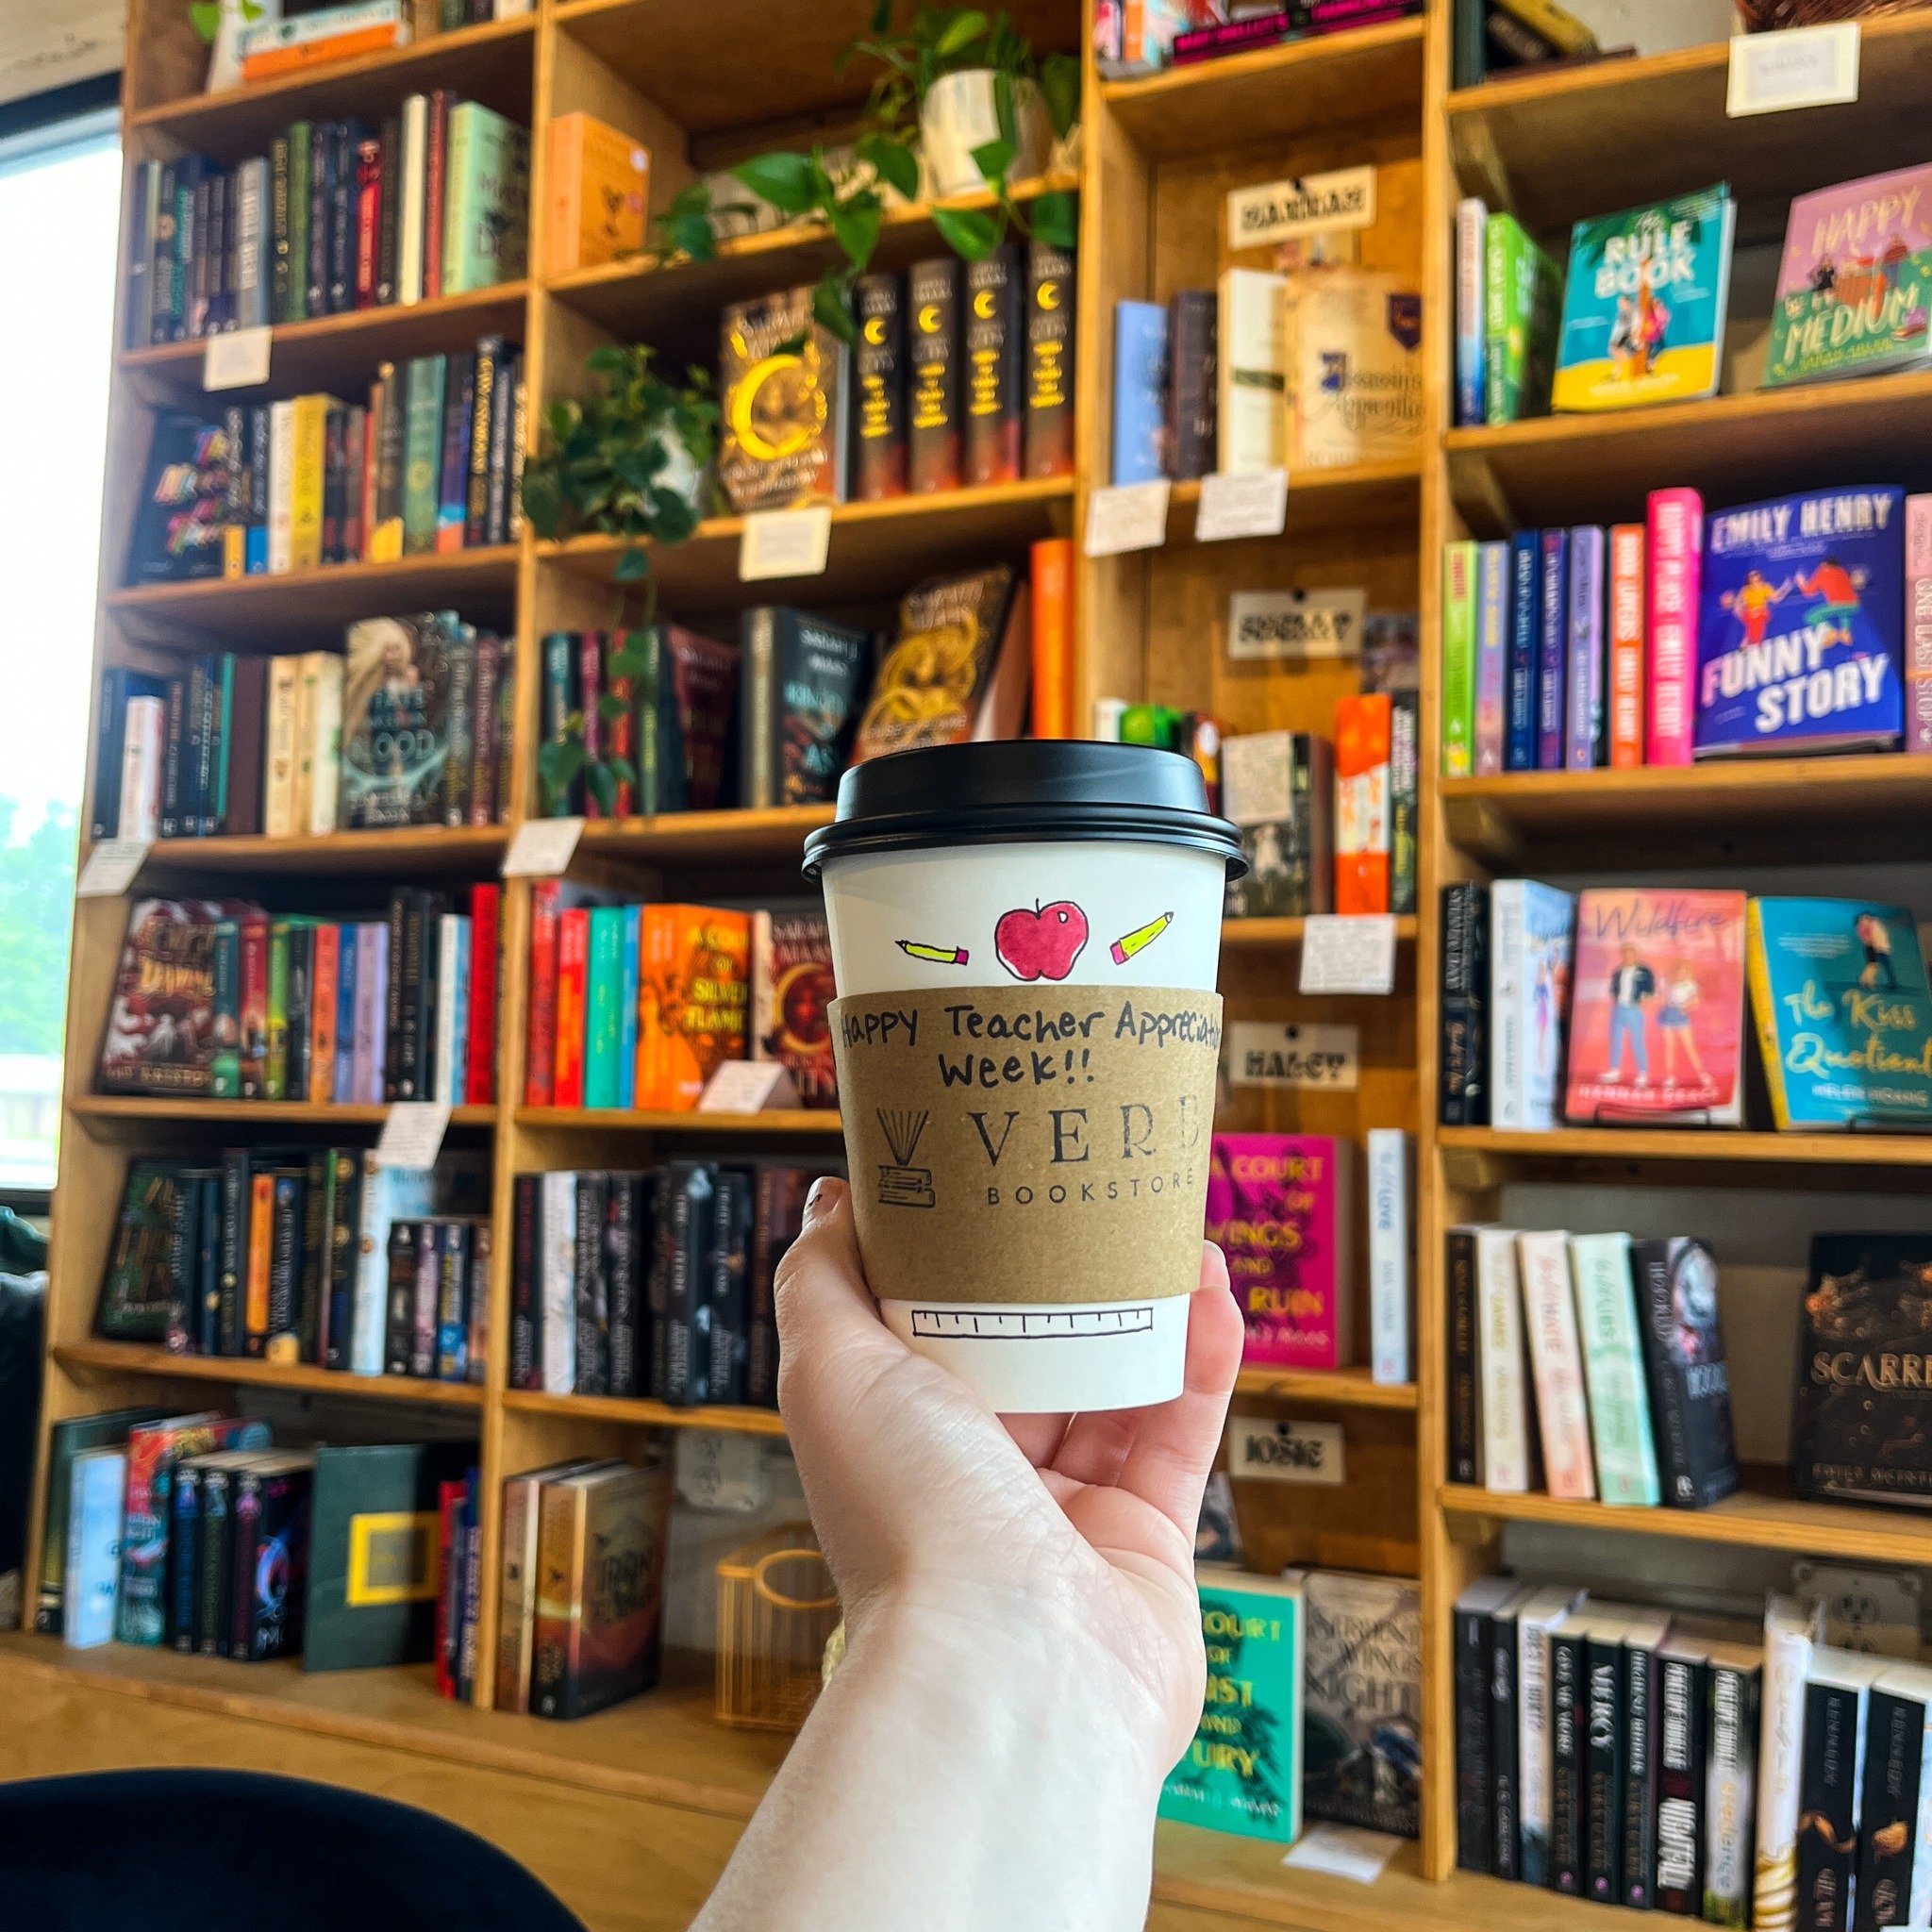 Cheers to the educators who fuel minds and inspire hearts every day! ☕📚 

Happy Teacher Appreciation Week!🍎✏️

Without educators, things like &quot;Verb Bookstore and Cafe&quot; could not exist. Thank you for all you do! 

Come cozy up with a book 